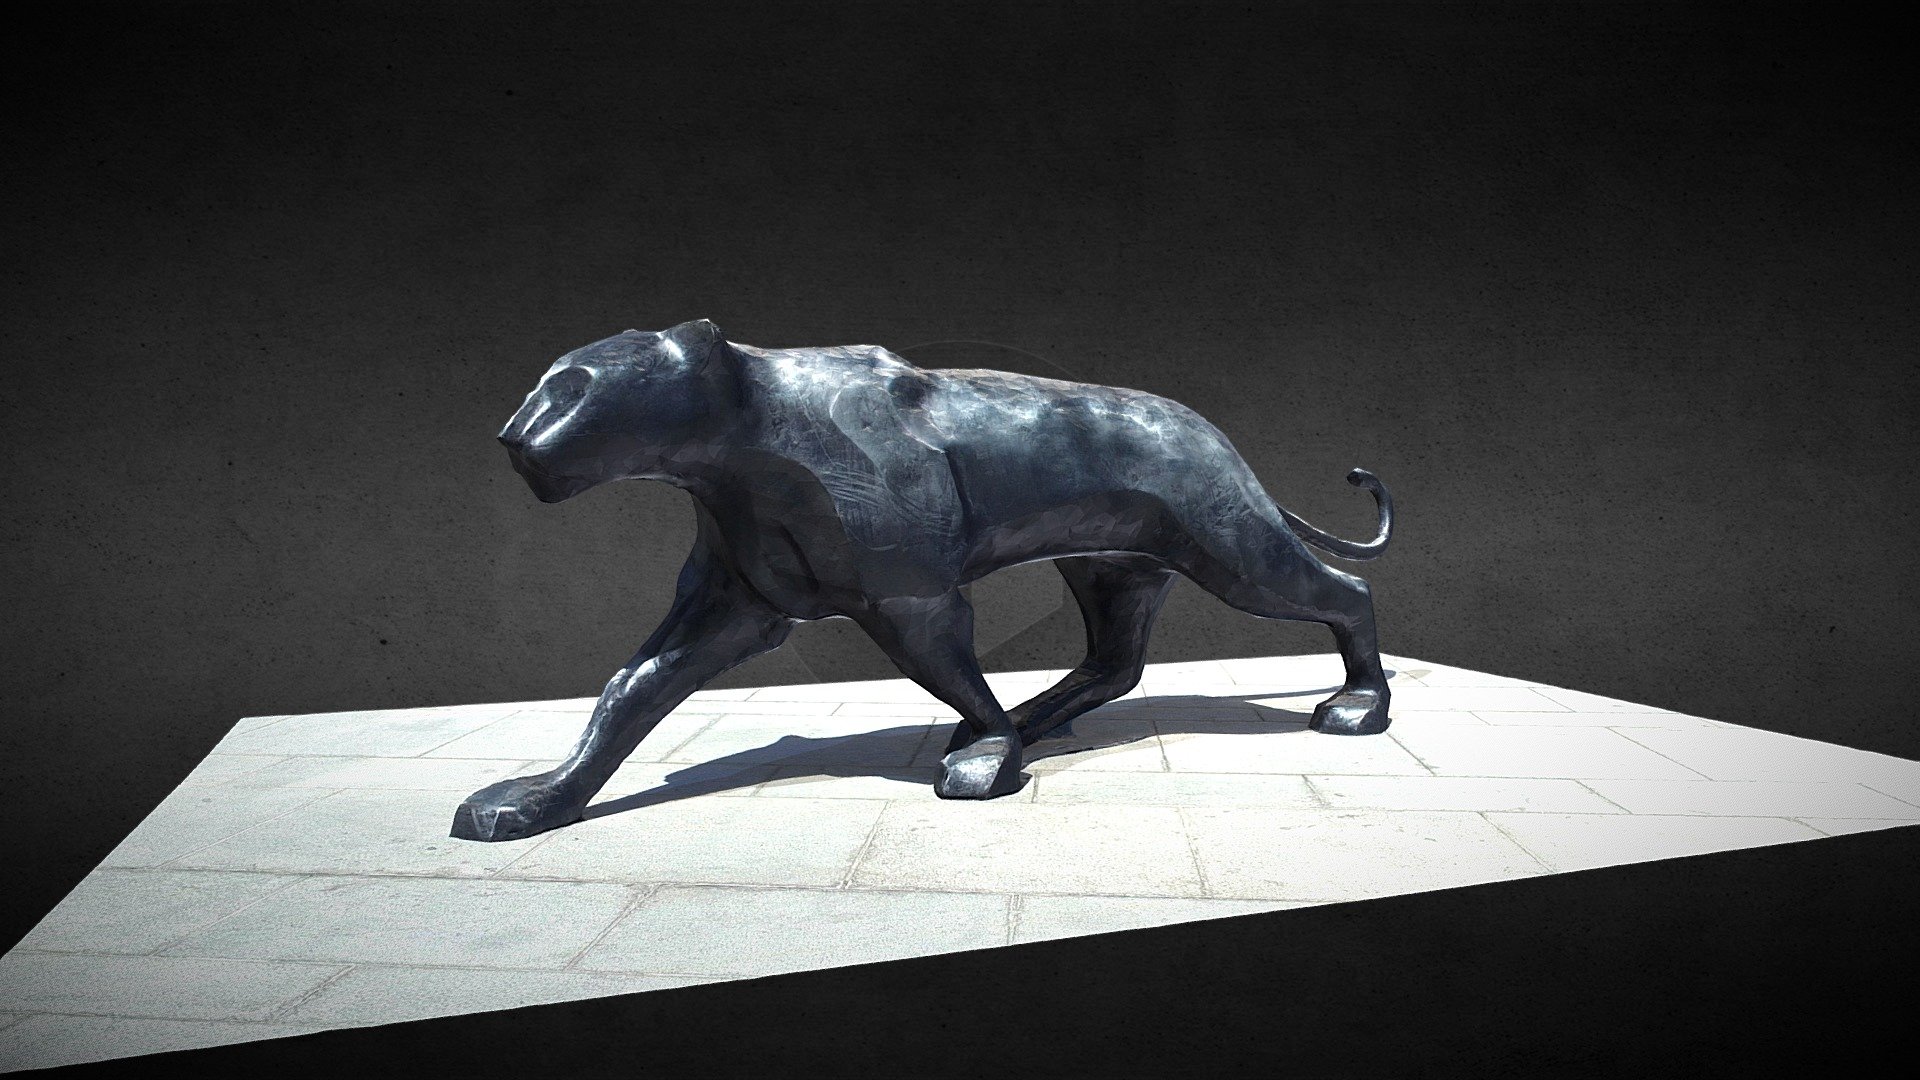 Bronze Sculpture - Black Panther（静安雕塑公园2018年展品） - Bronze Sculpture - Black Panther - Buy Royalty Free 3D model by Tigershill (@tigerofchen) 3d model